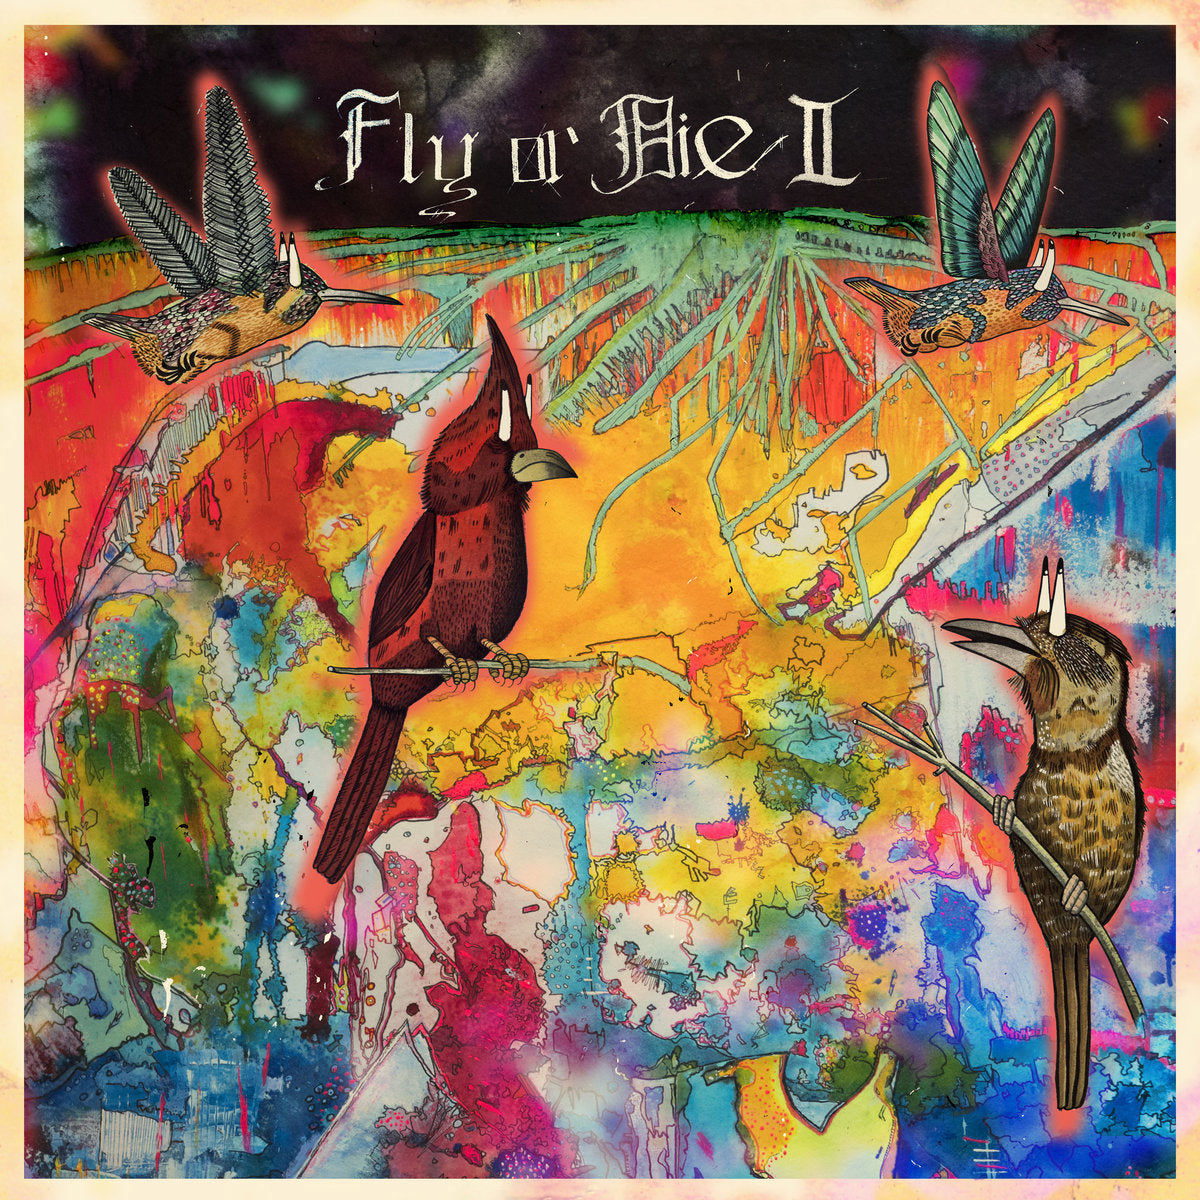 FLY or DIE II: bird dogs of paradise (New LP)